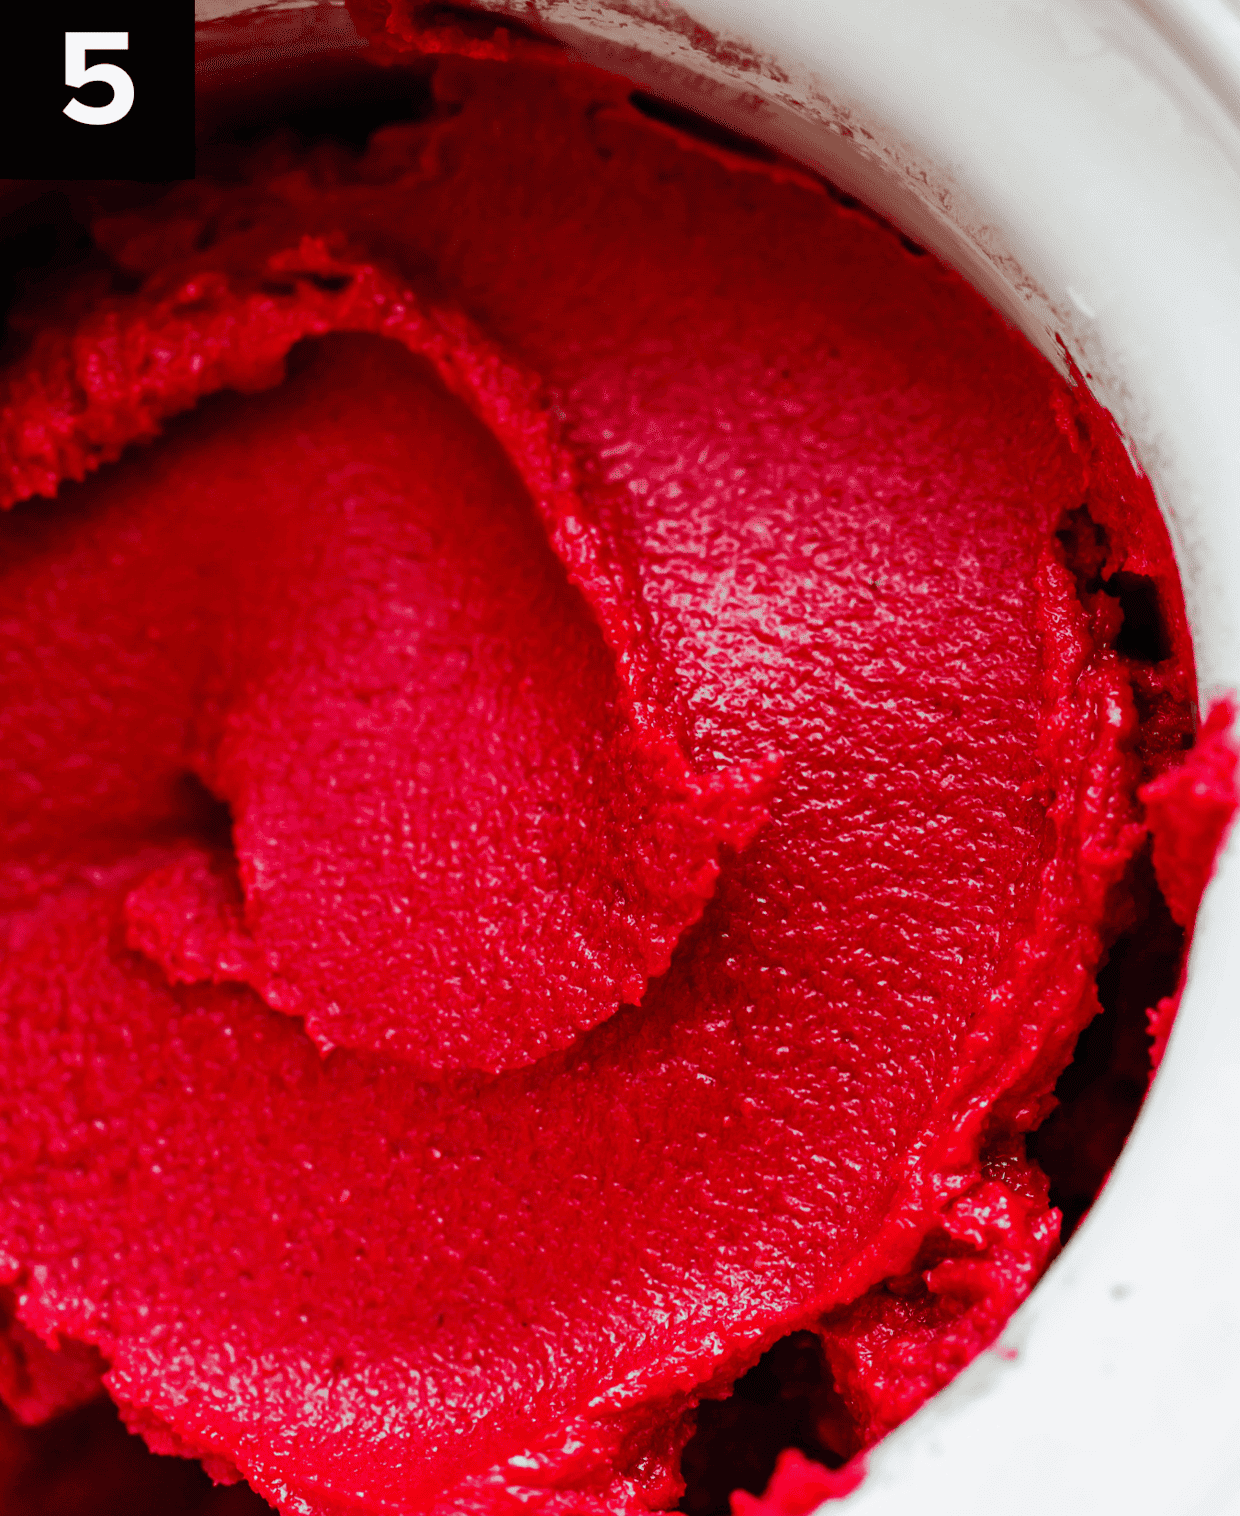 Raspberry Sorbet in an ice cream maker, having just finished churning.